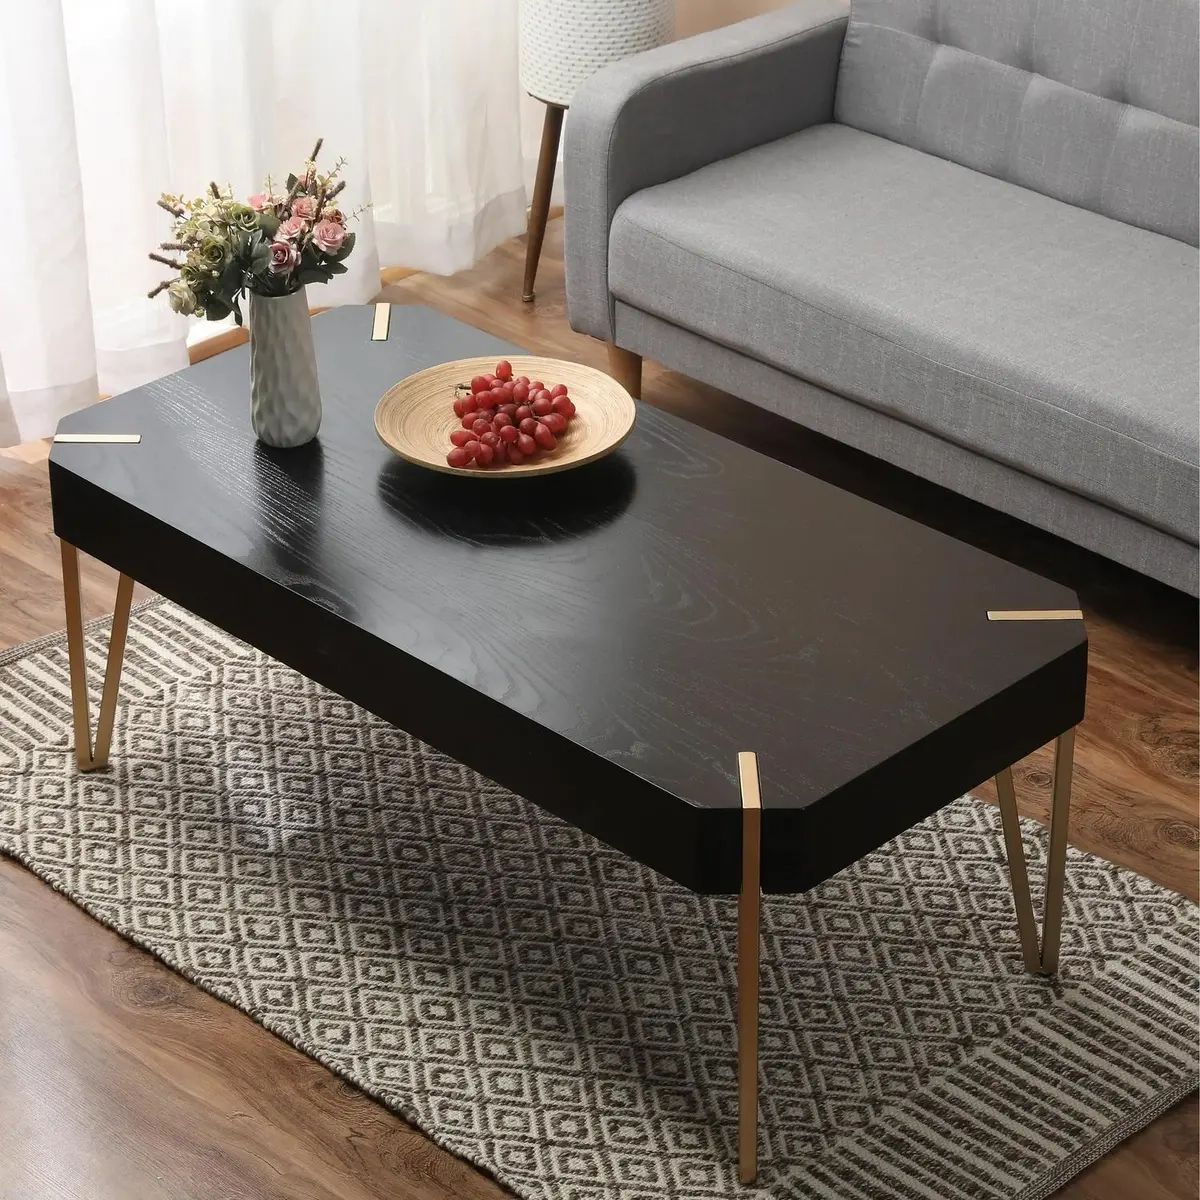 Rectangular Black Wooden Coffee Table W/Gold Hairpin Metal Legs, Matte  Finish | Ebay Inside Coffee Tables With Metal Legs (View 14 of 15)